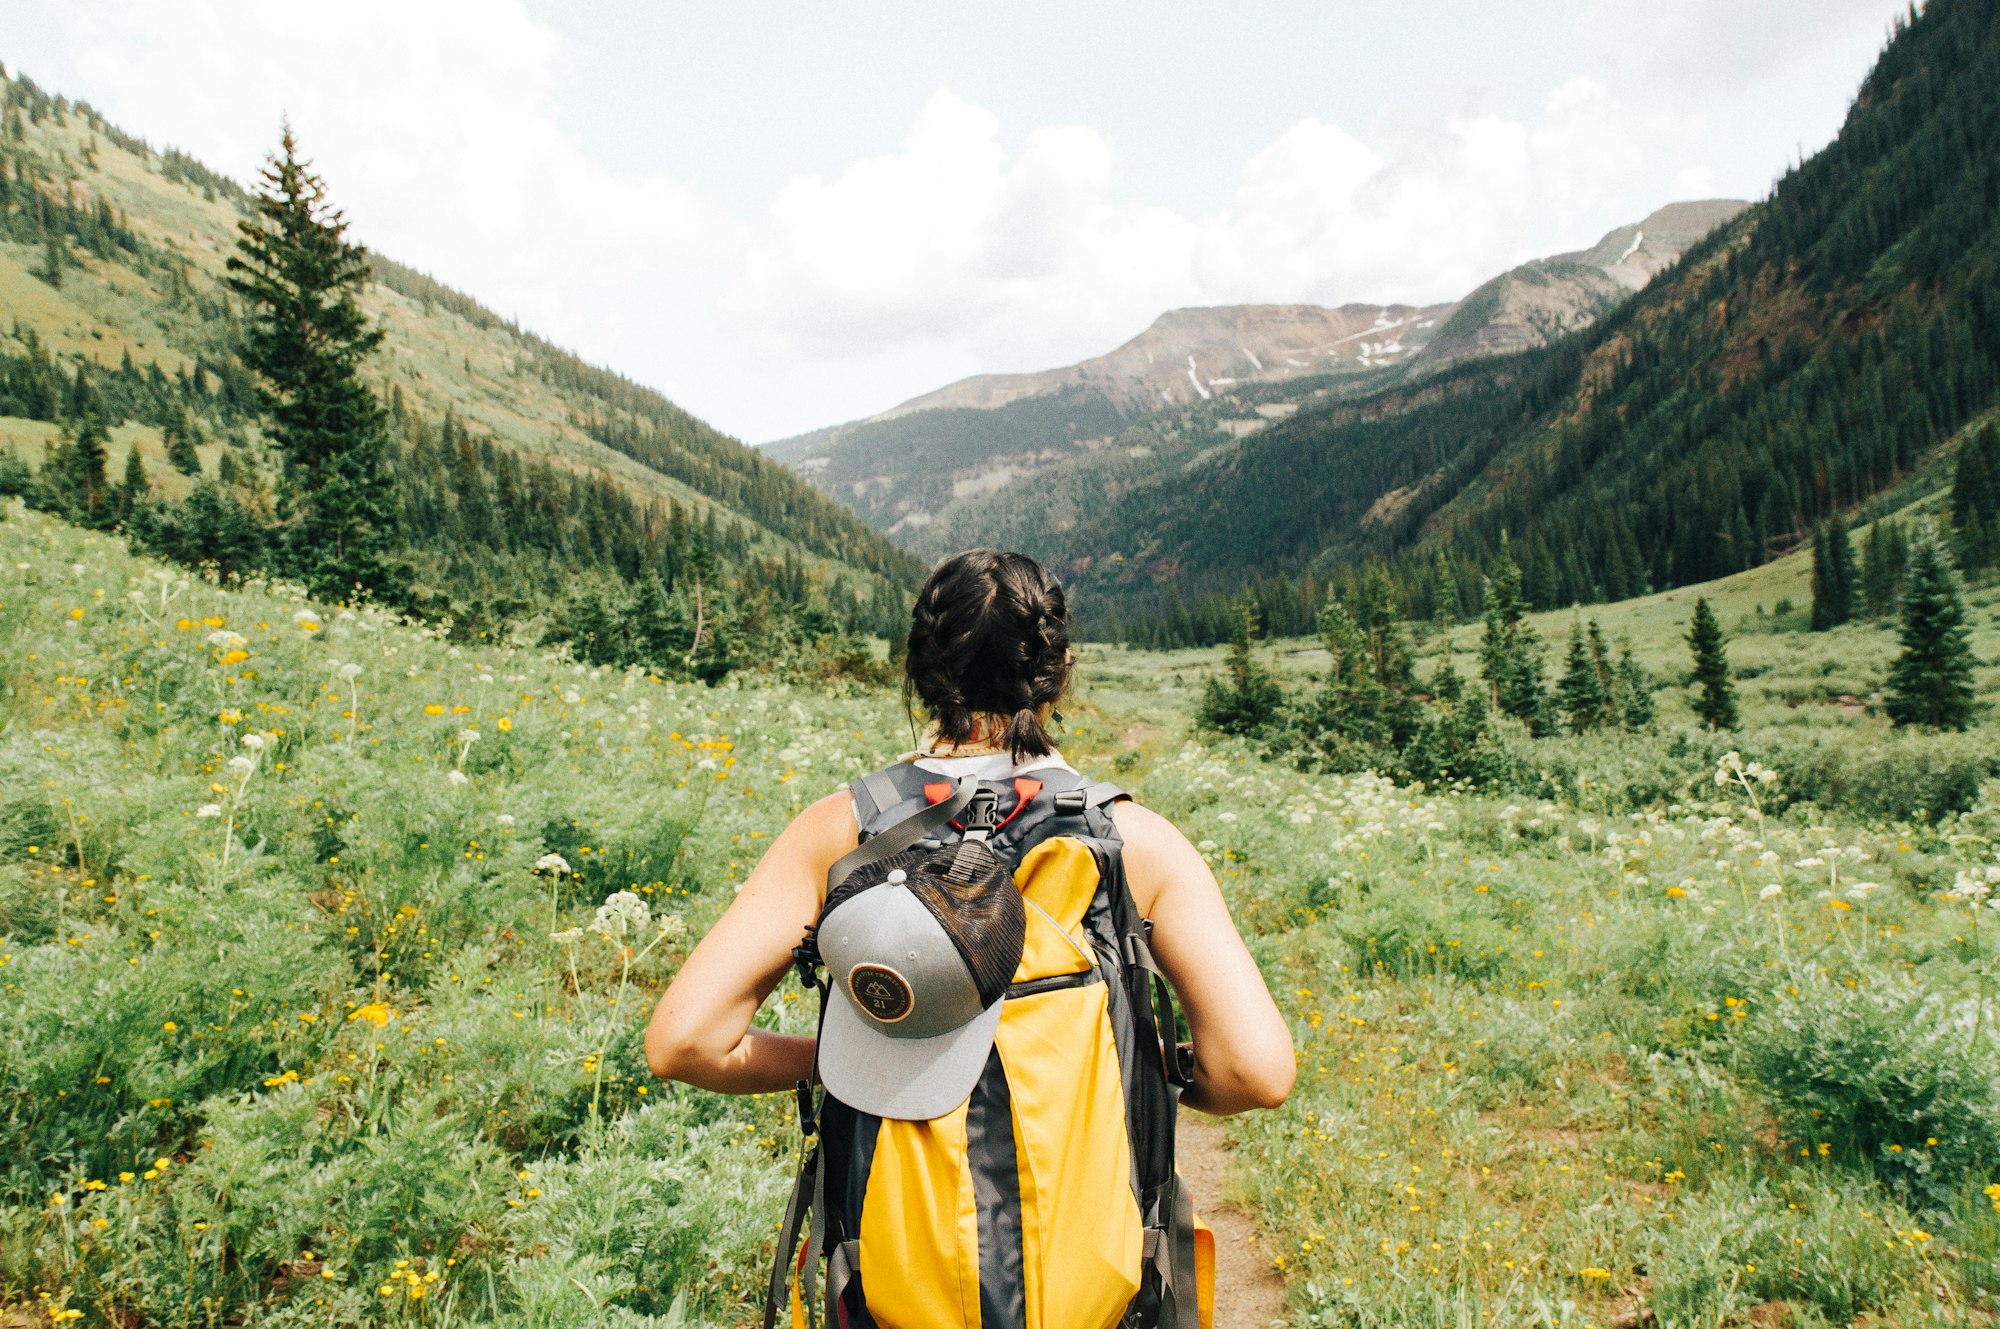 Best Hiking Backpack for Women in 2022 | The Perfect Hiking Daypacks For Women Rated!